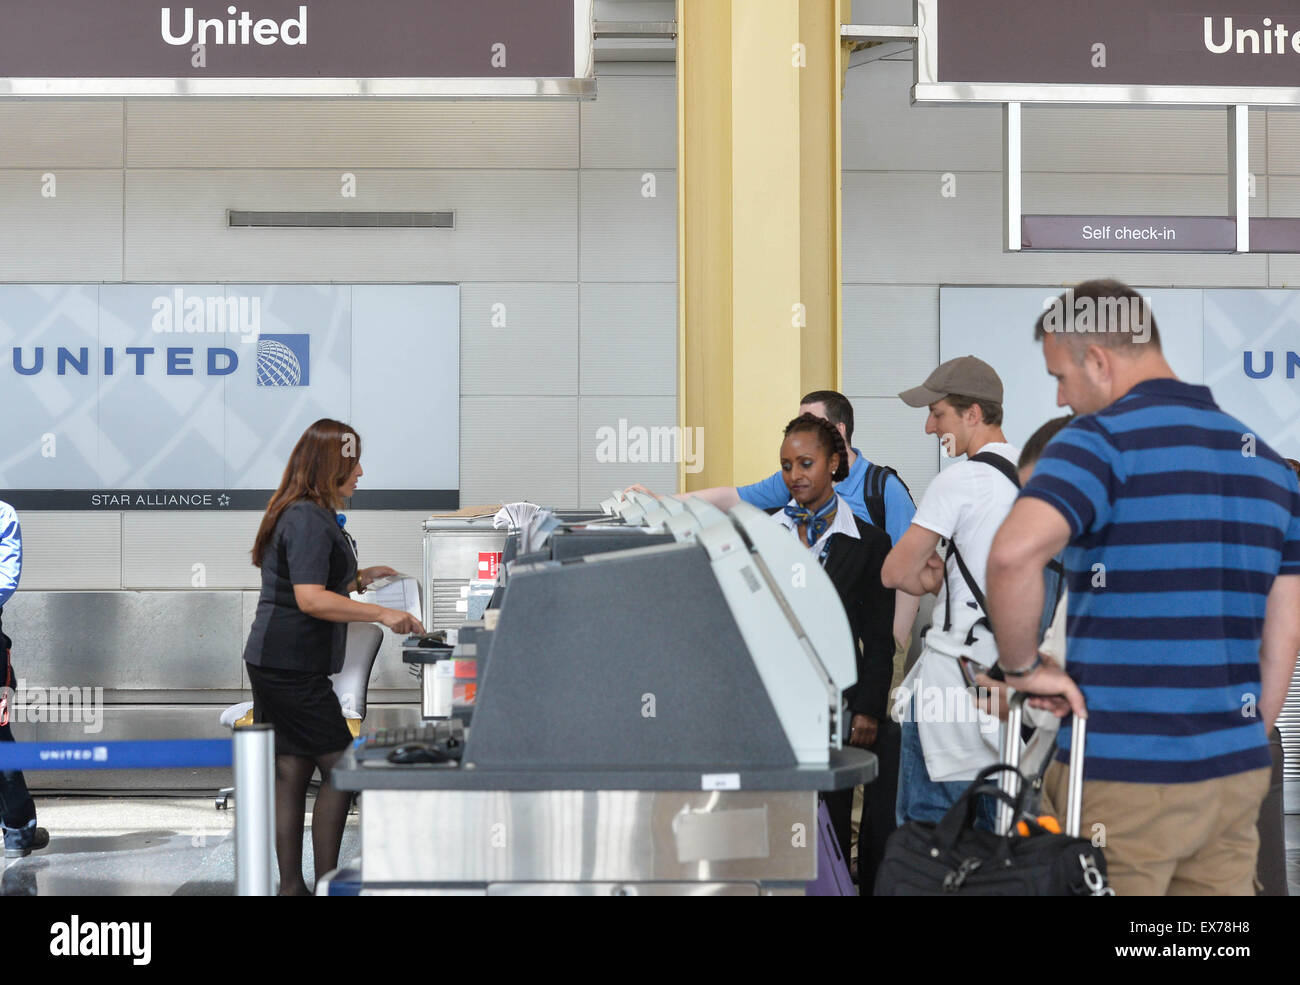 Washington, DC, USA. 8th July, 2015. People print boarding cards with United Airlines at Ronald Reagan Washington National Airport in Washington, DC, the United States, on July 8, 2015. United Airlines (UA) resumed flights at all airports that had been grounded Wednesday morning for about two hours due to a computer glitch, according to the U.S. Federal Aviation Administration (FAA). Credit:  Bao Dandan/Xinhua/Alamy Live News Stock Photo